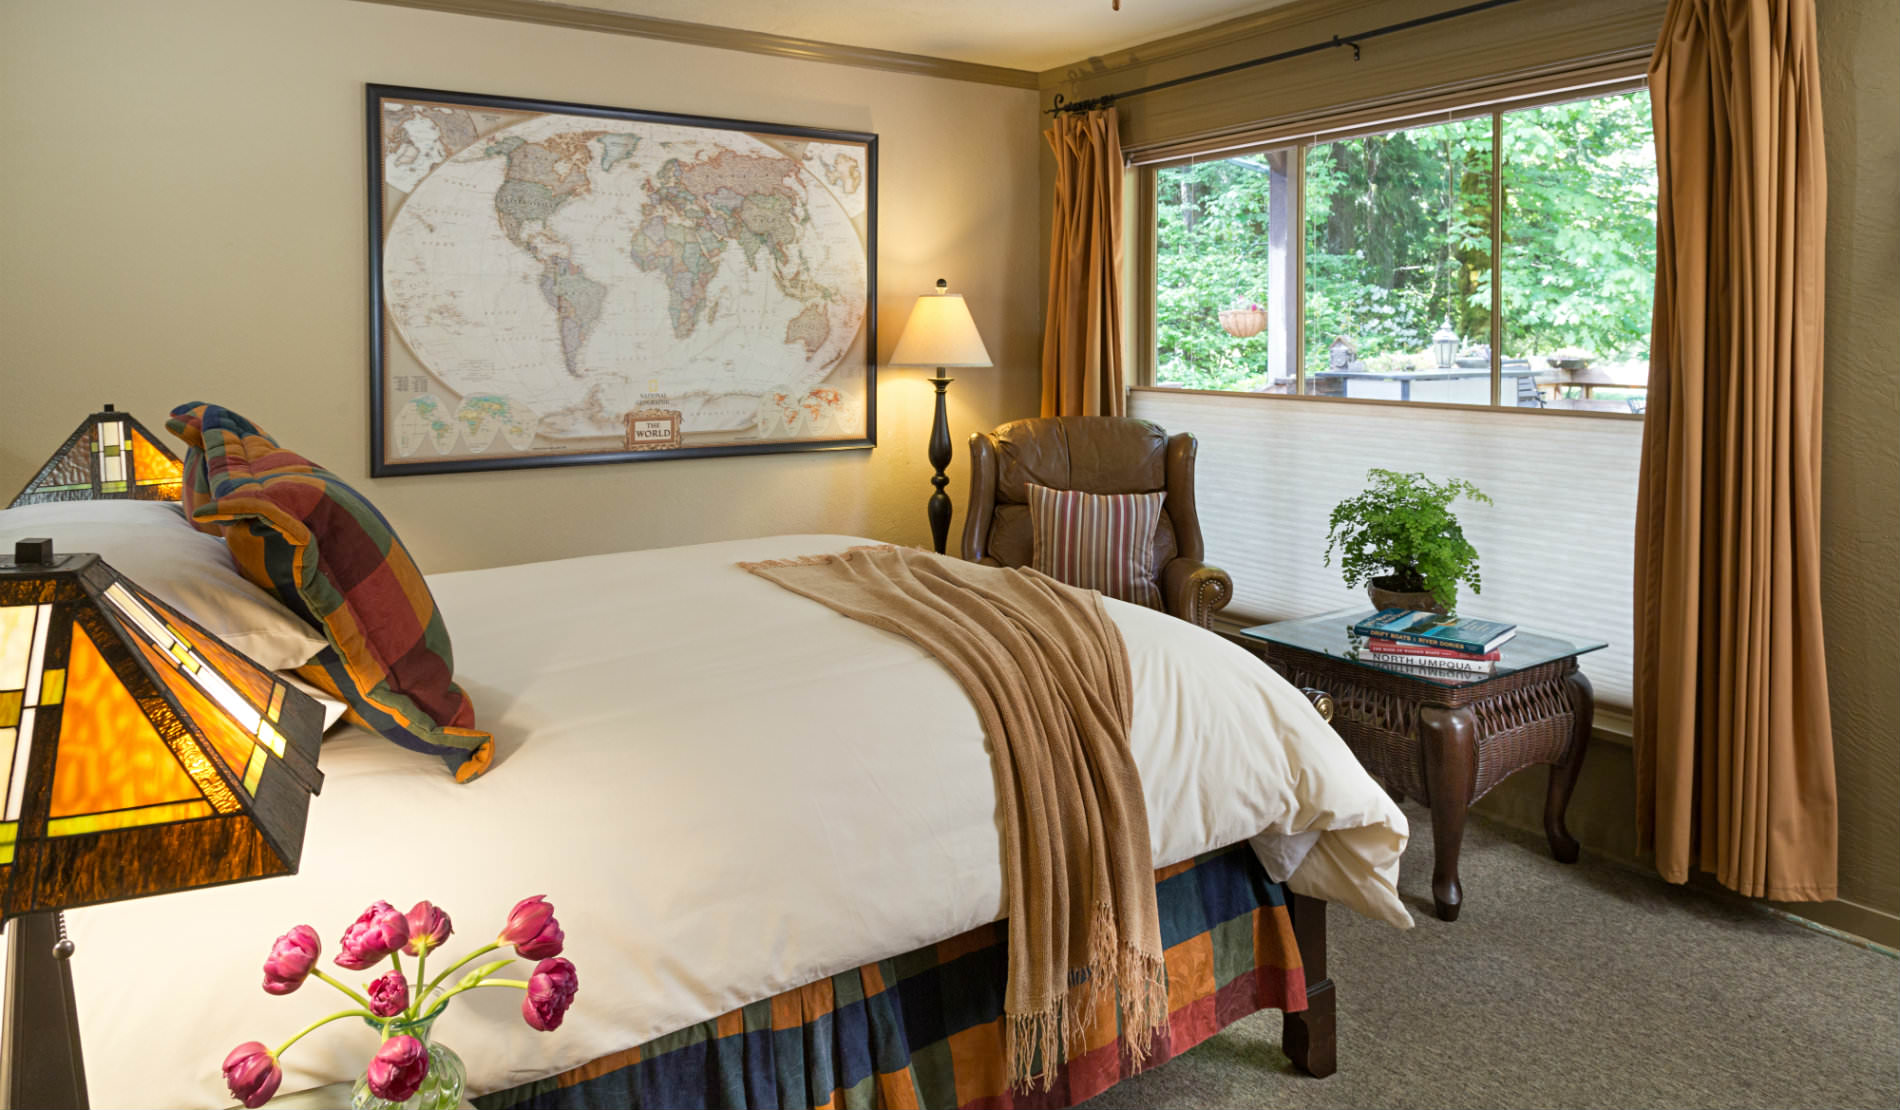 Bed facing large window with view of green trees, map of world, craftsman lamps.